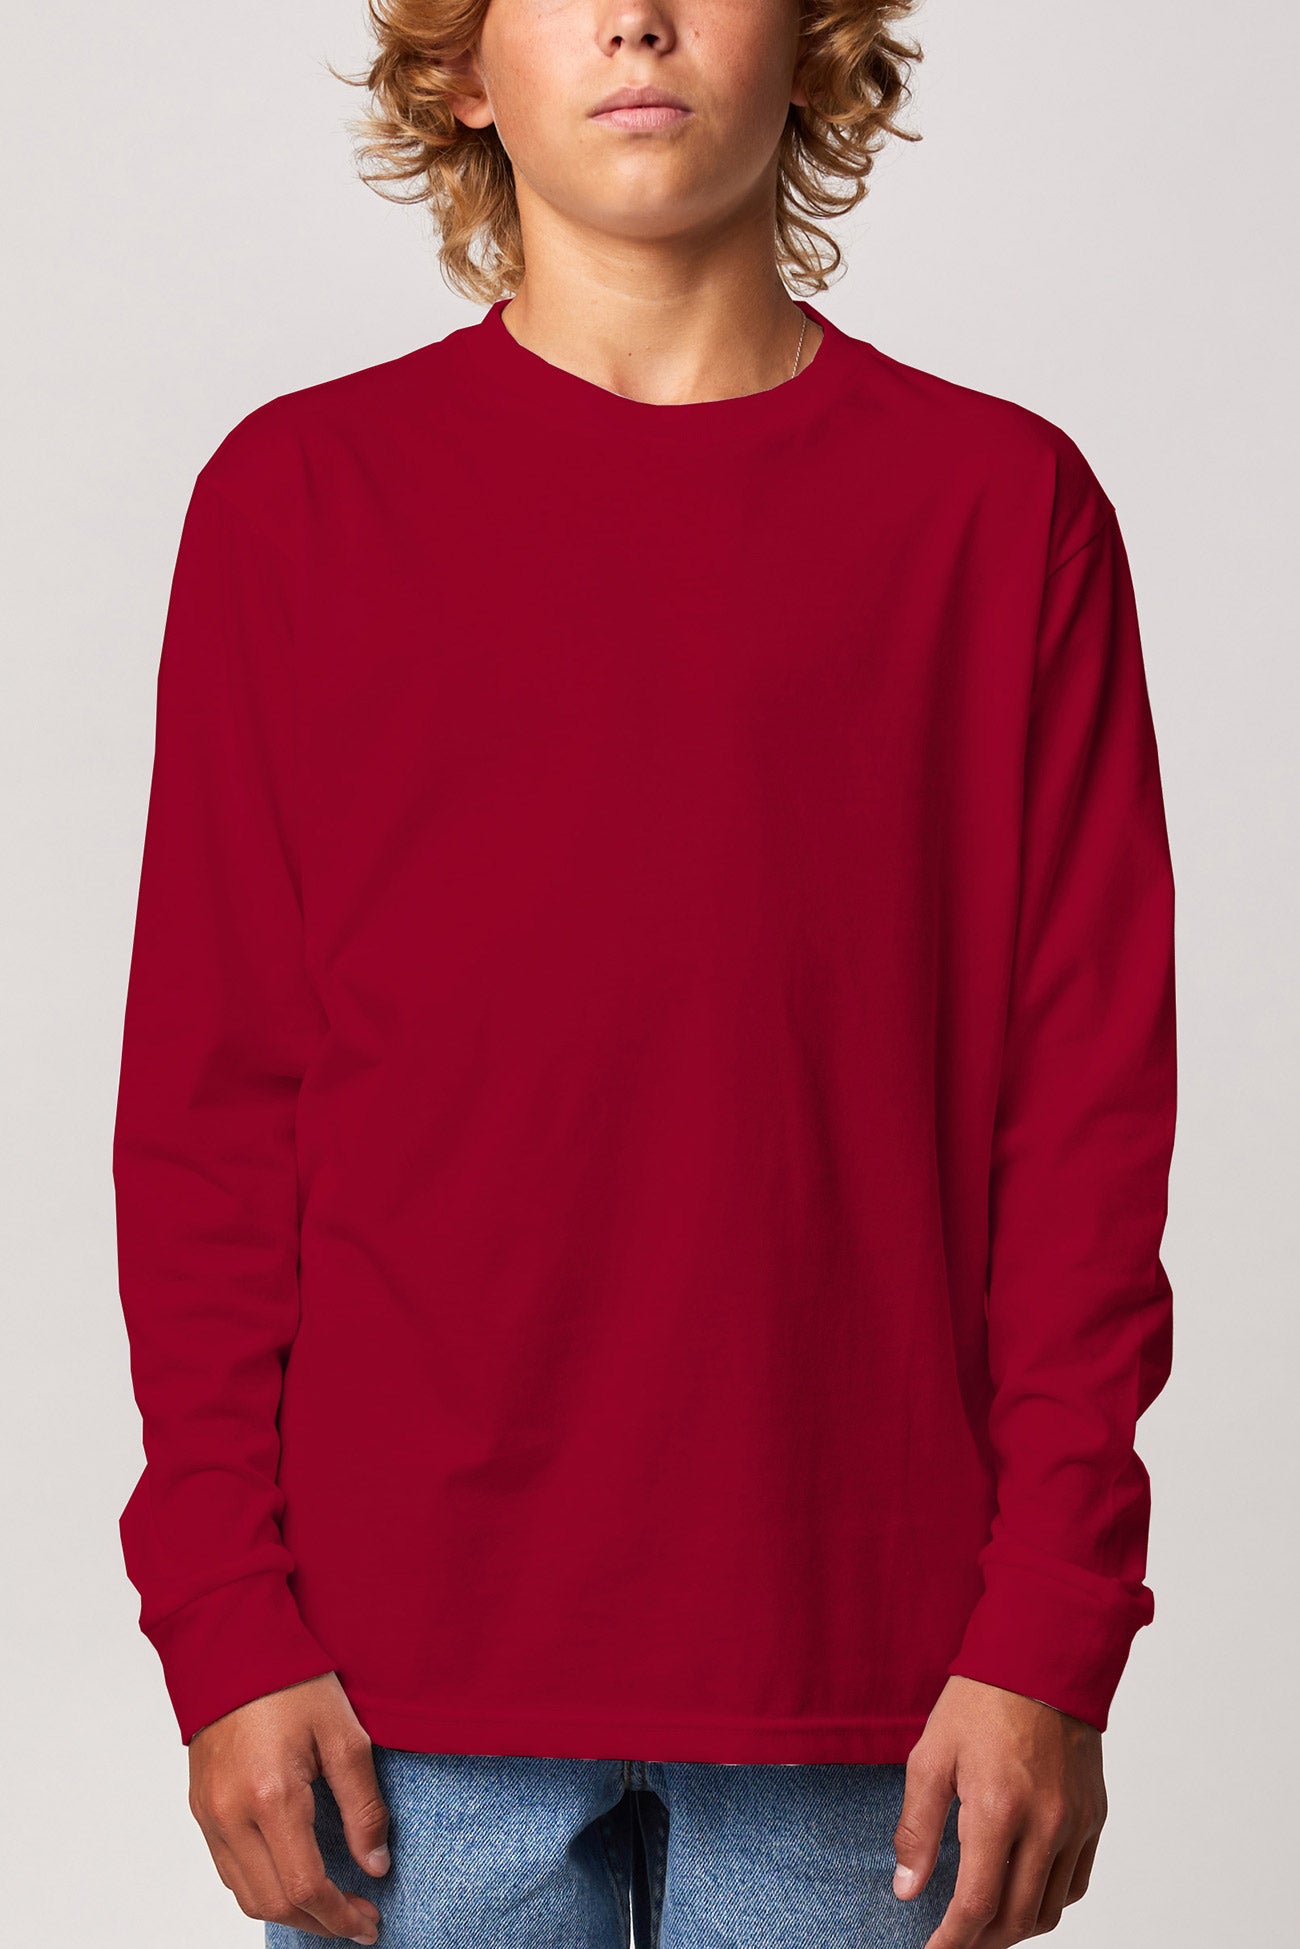 #SY1150LS Prime - Long Sleeve Crew - Youth